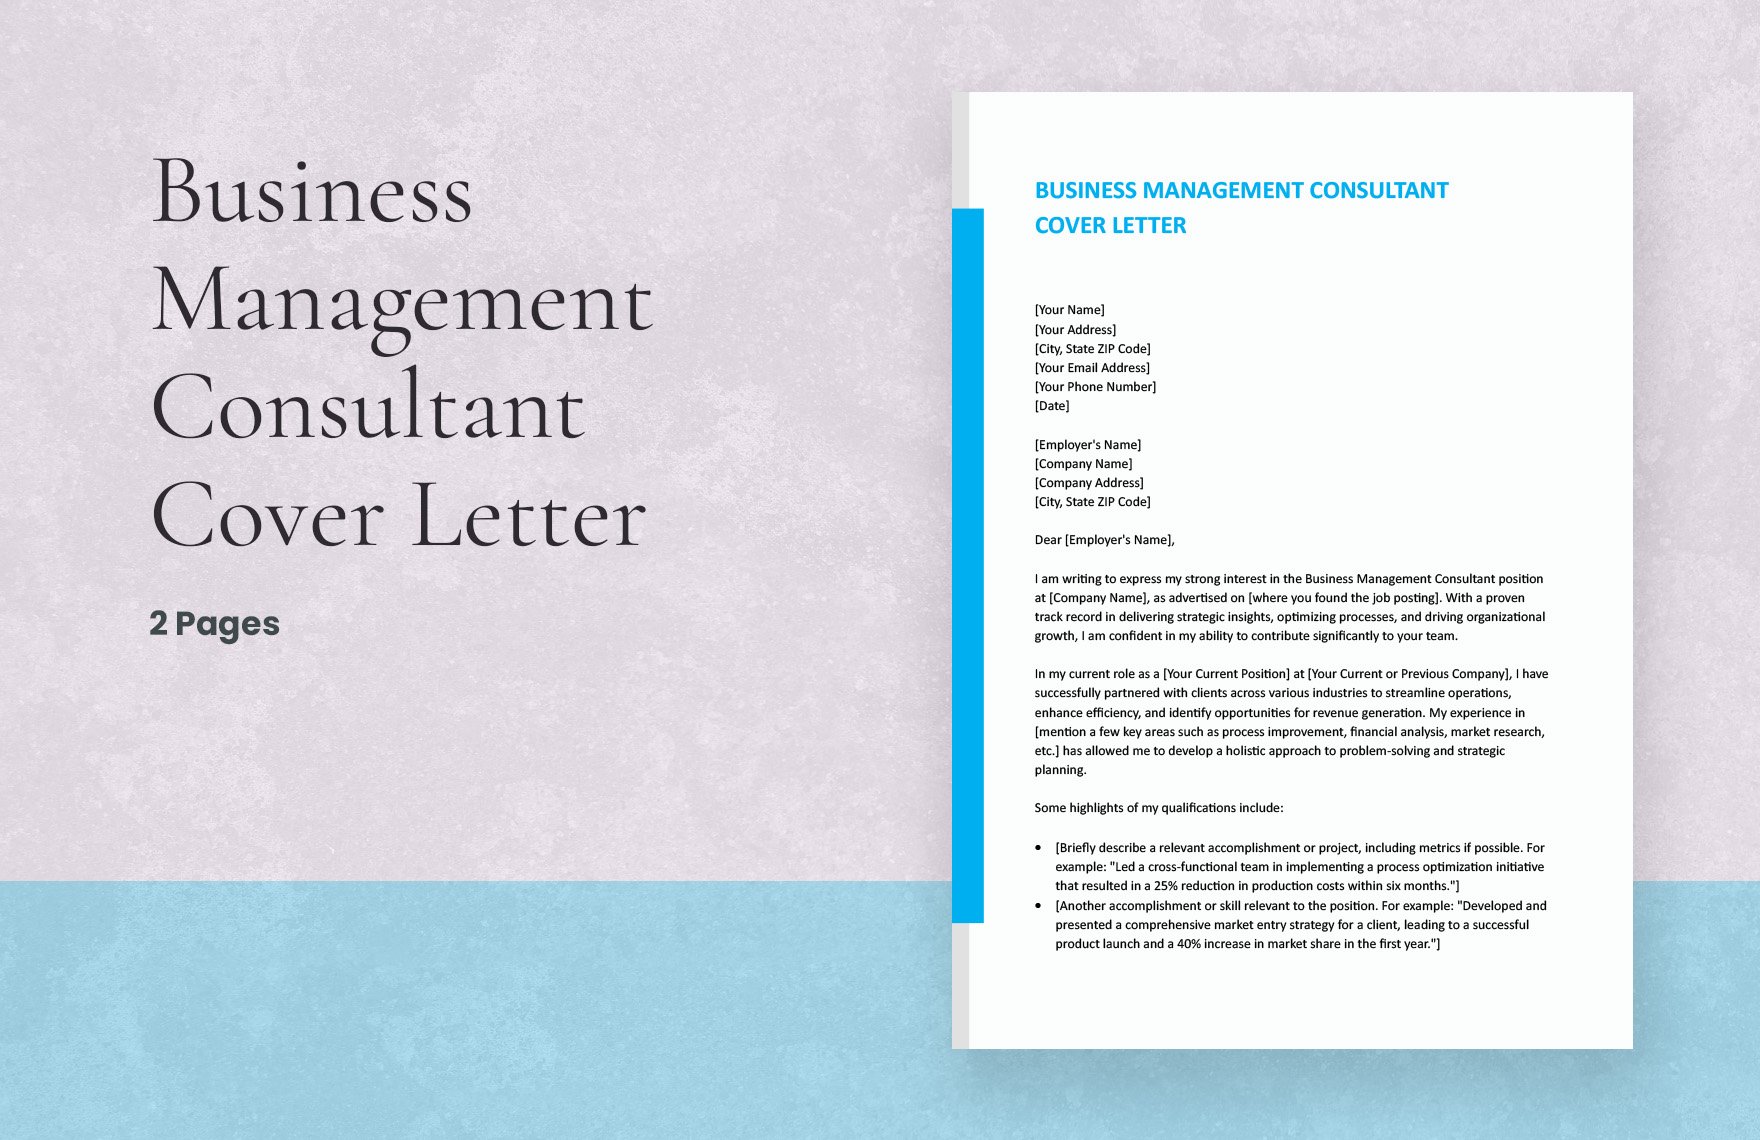 Business Management Consultant Cover Letter